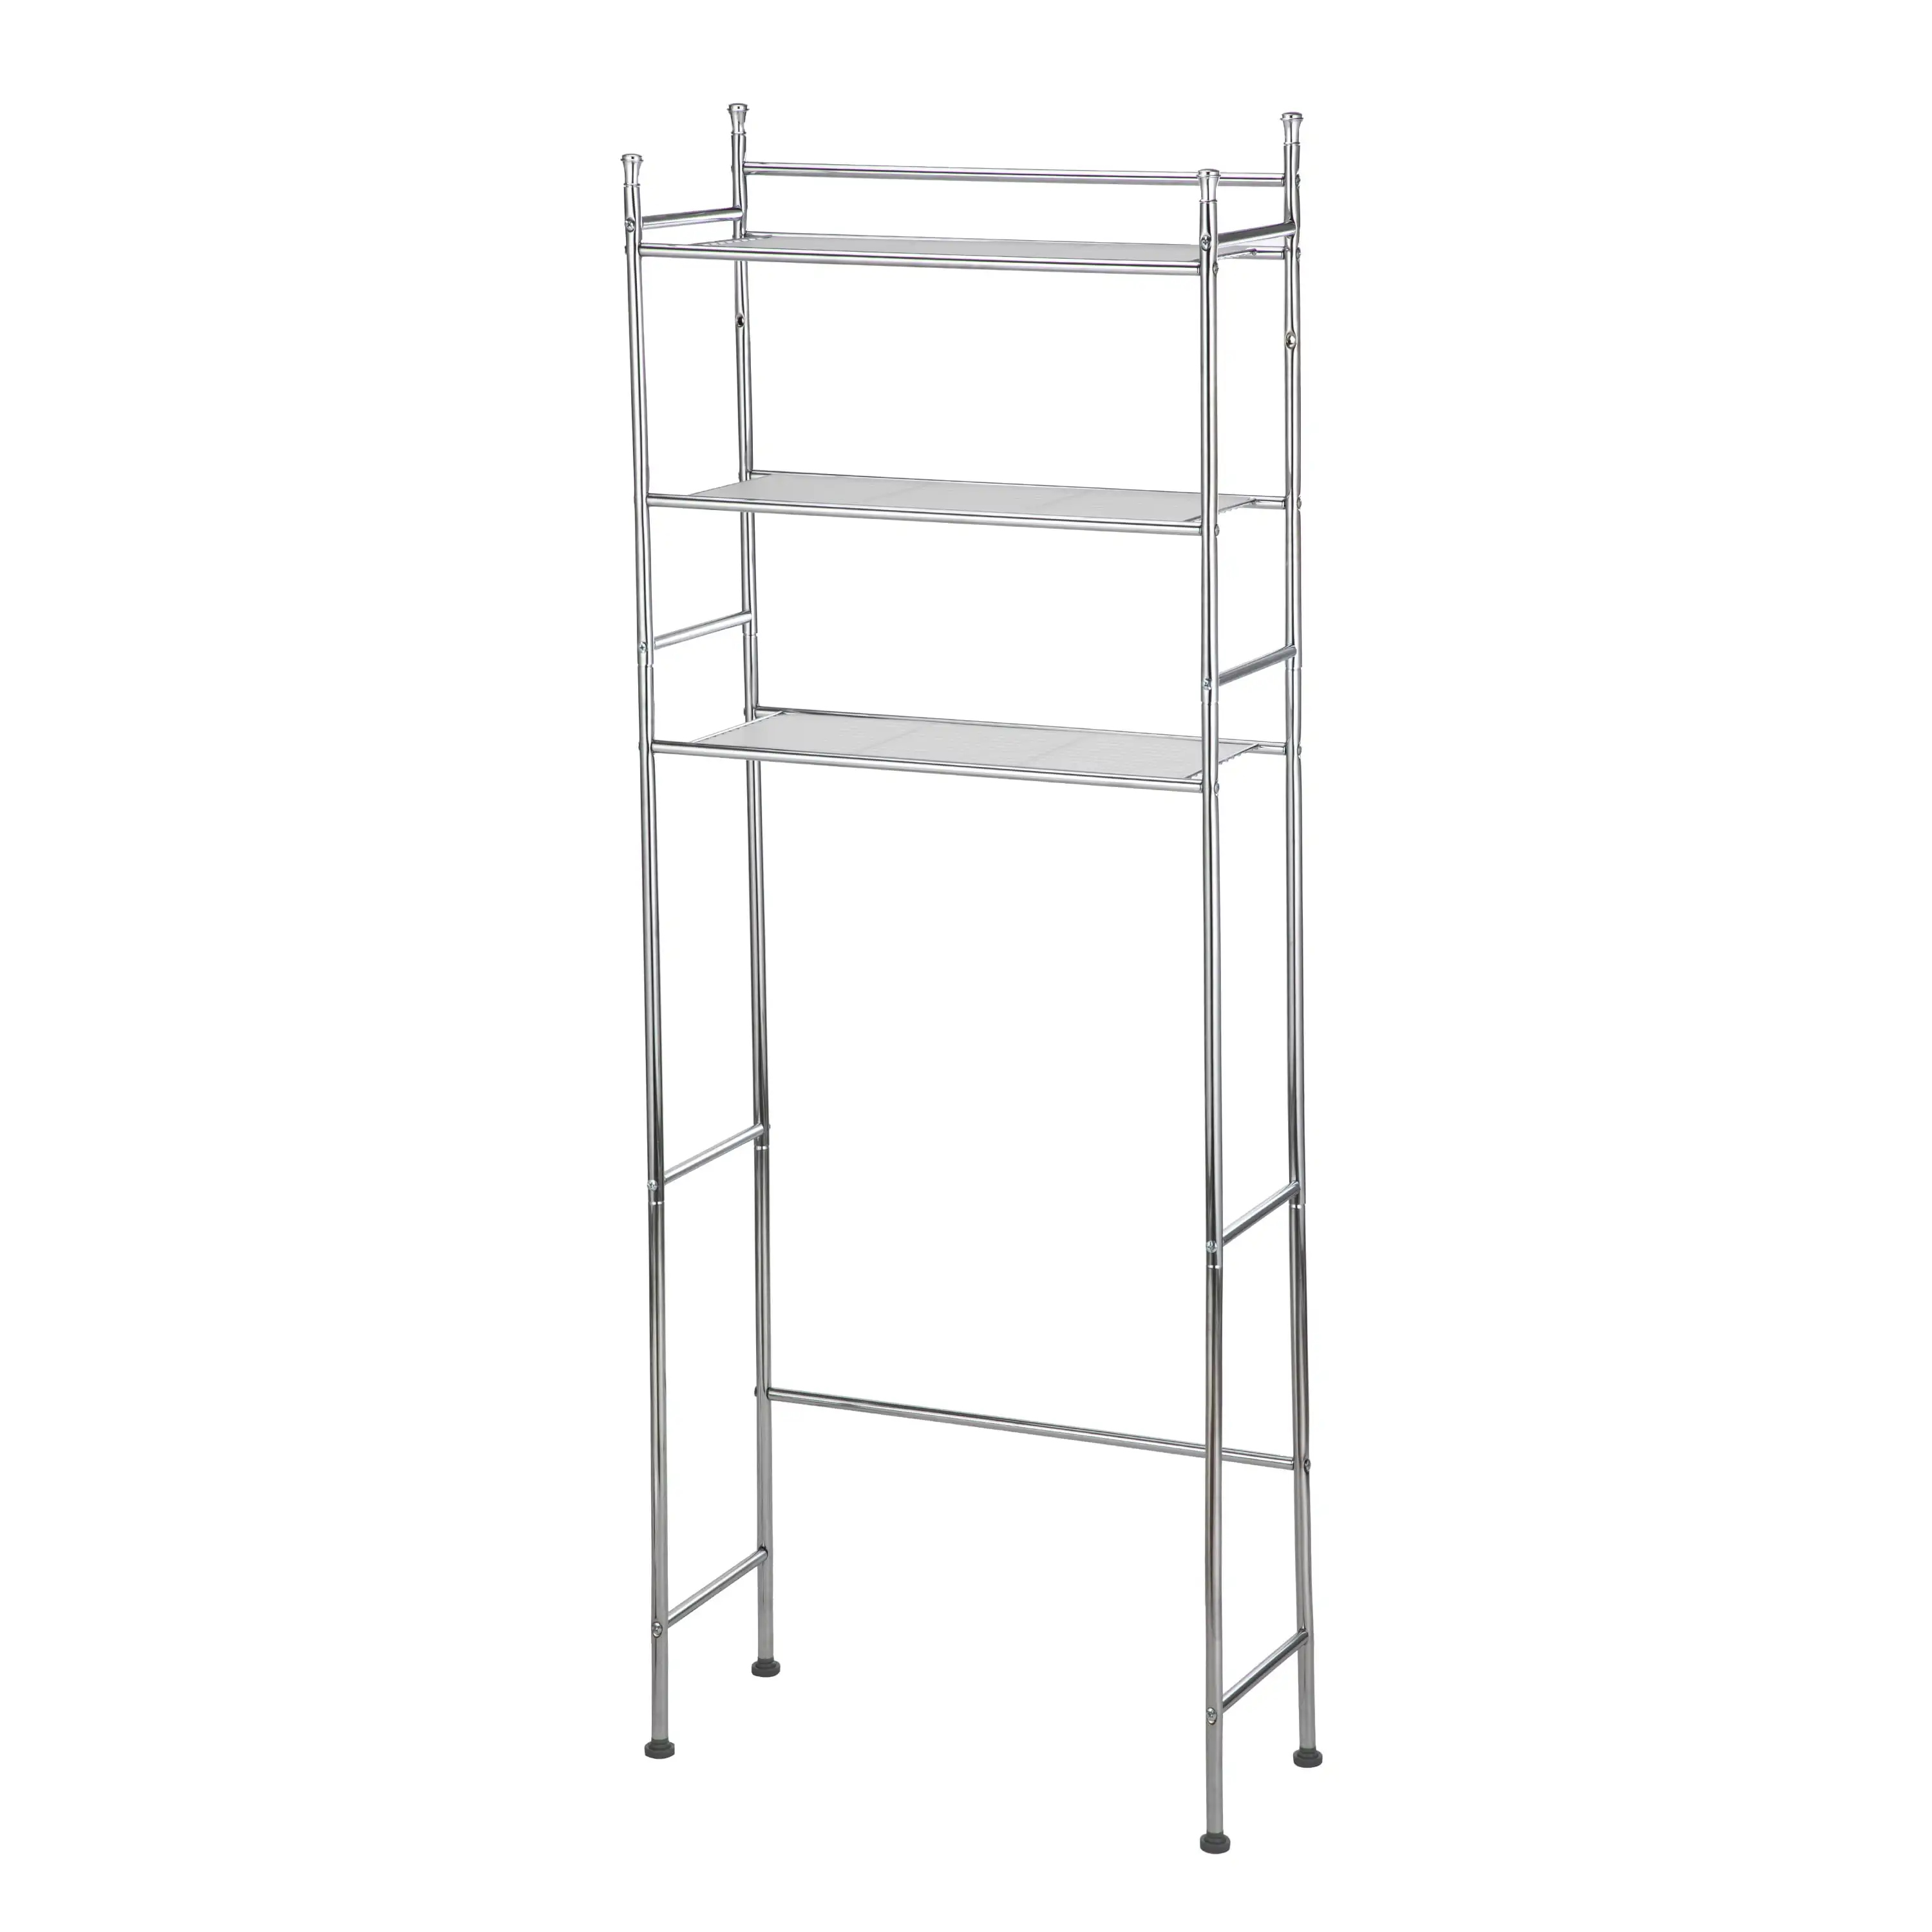 

Over the Toilet Steel 3-Shelf Storage Shelf Unit Space Saver, Chrome Finish for Adults